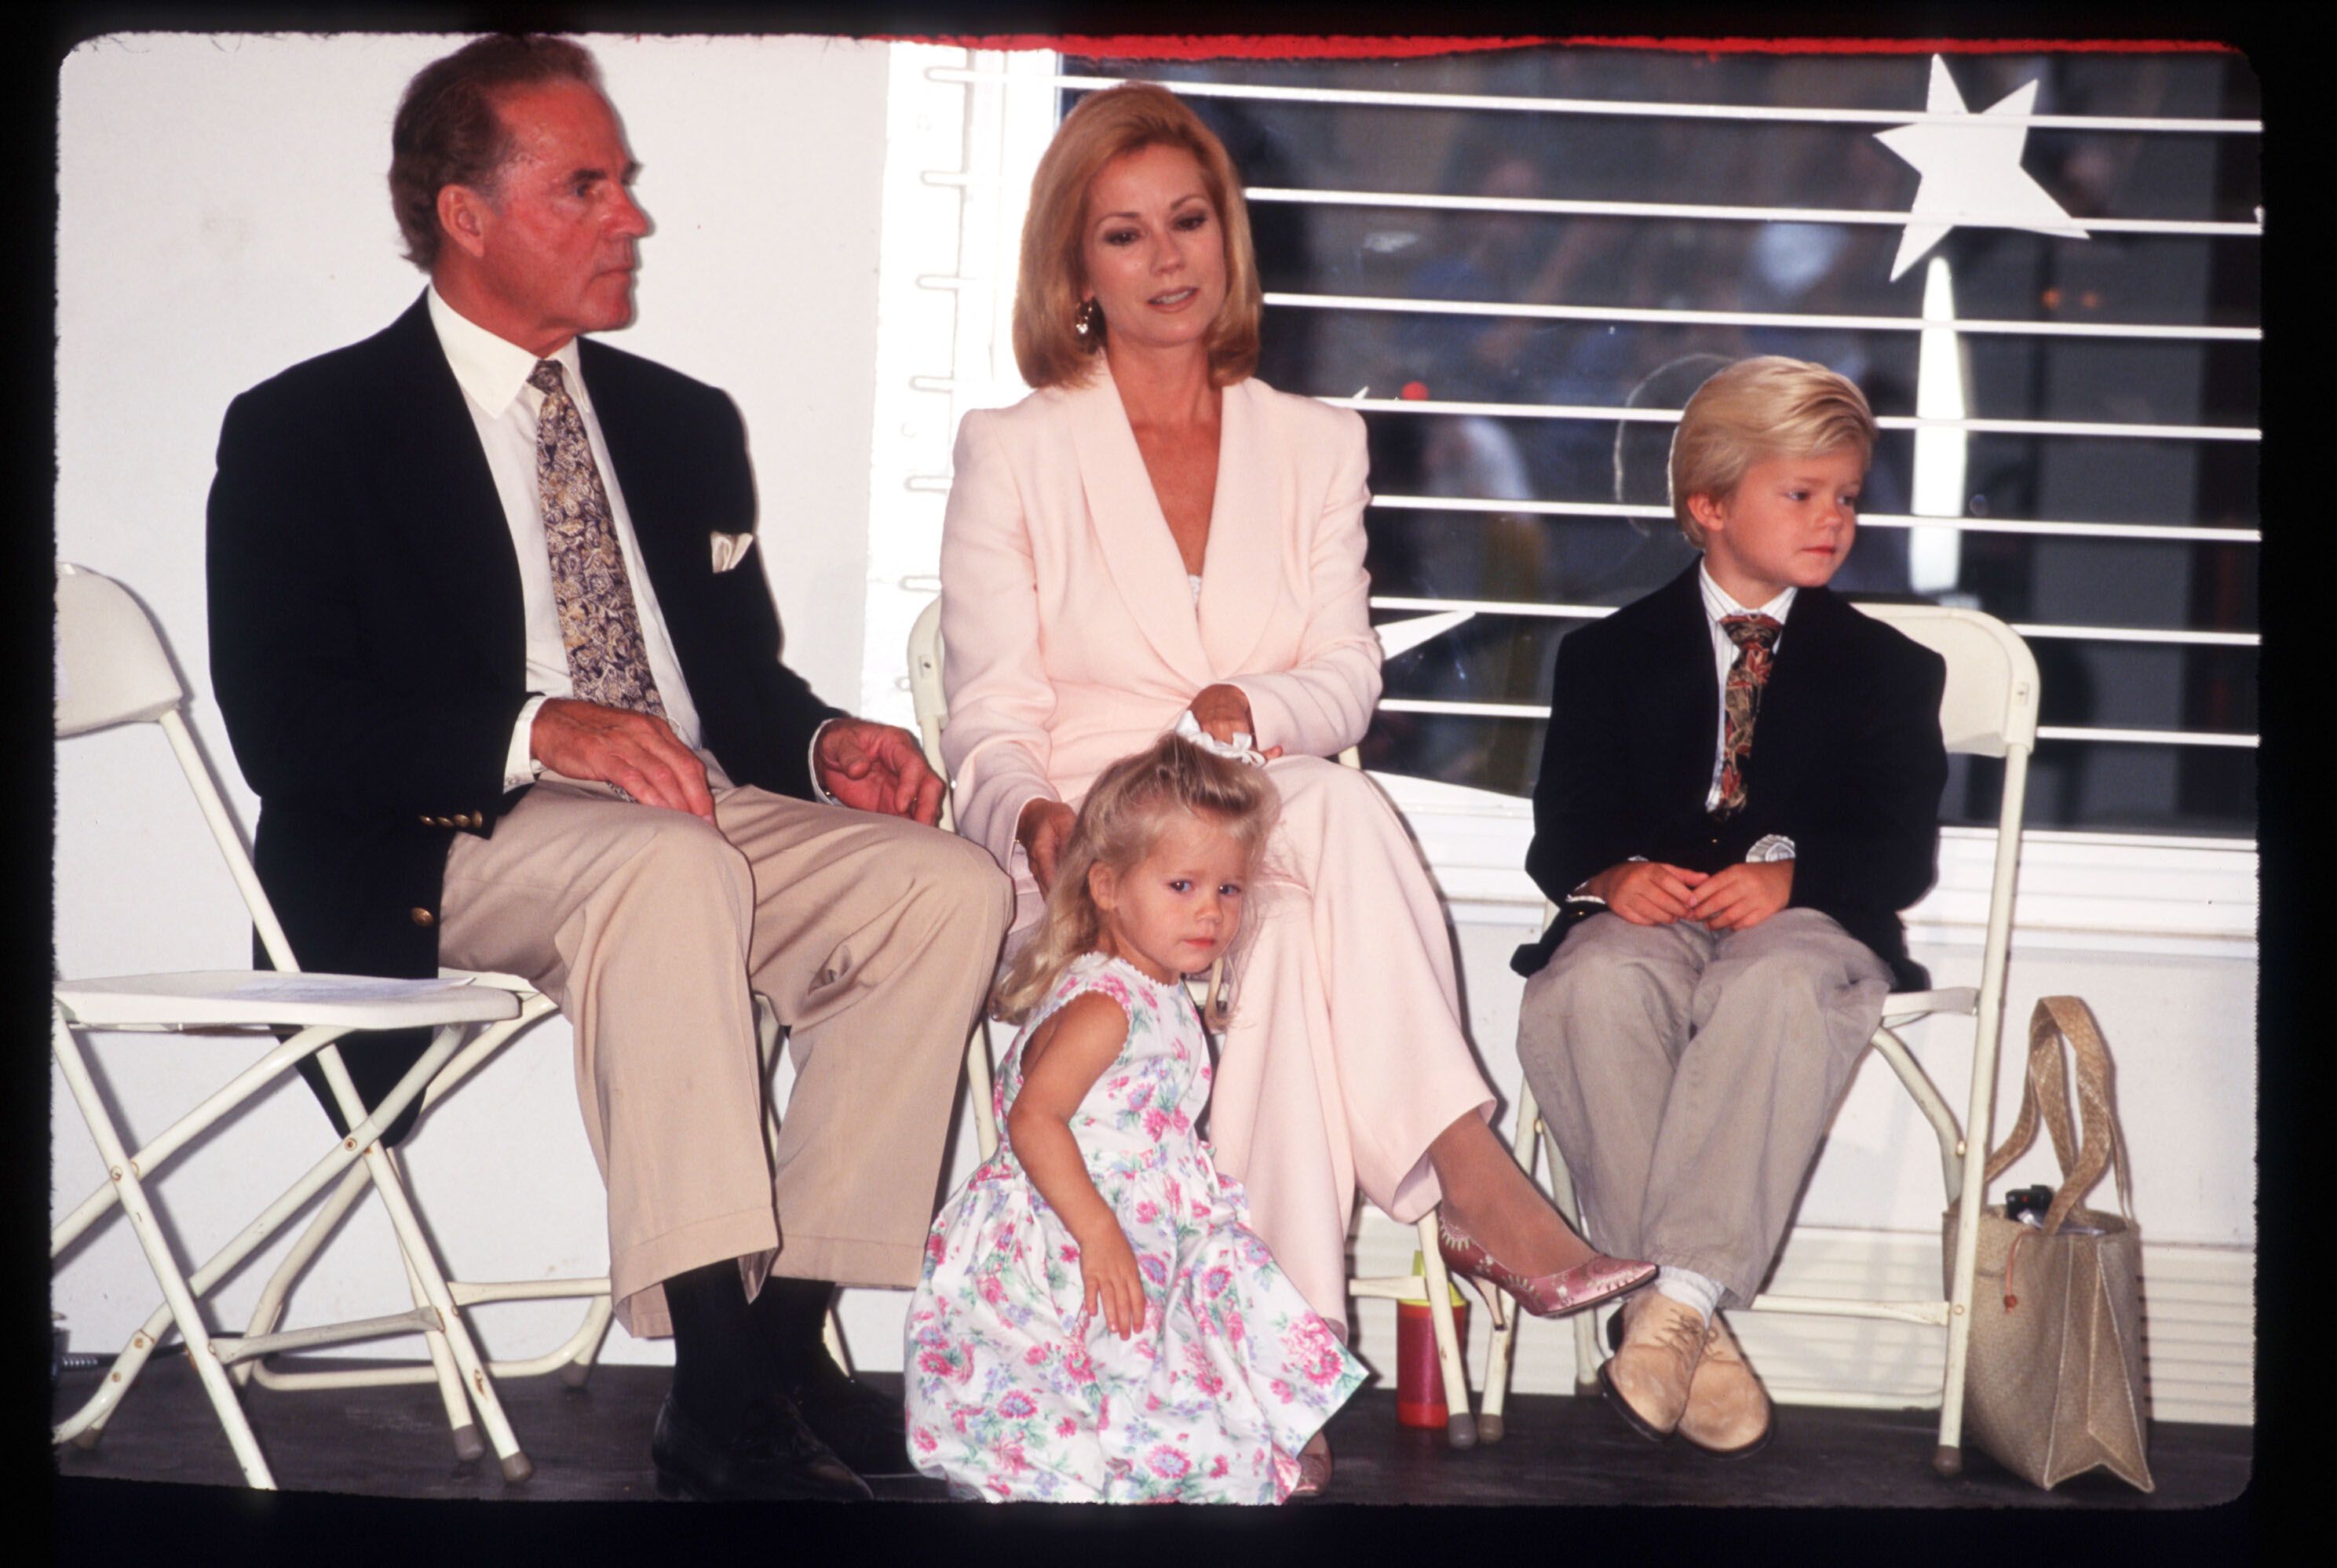 Frank and Kathie Lee Gifford sit with their children, Cody and Cassidy, at the dedication of Cassidy's Place on June 10, 1996, in New York City | Photo: Evan Agostini/Liaison/Getty Images